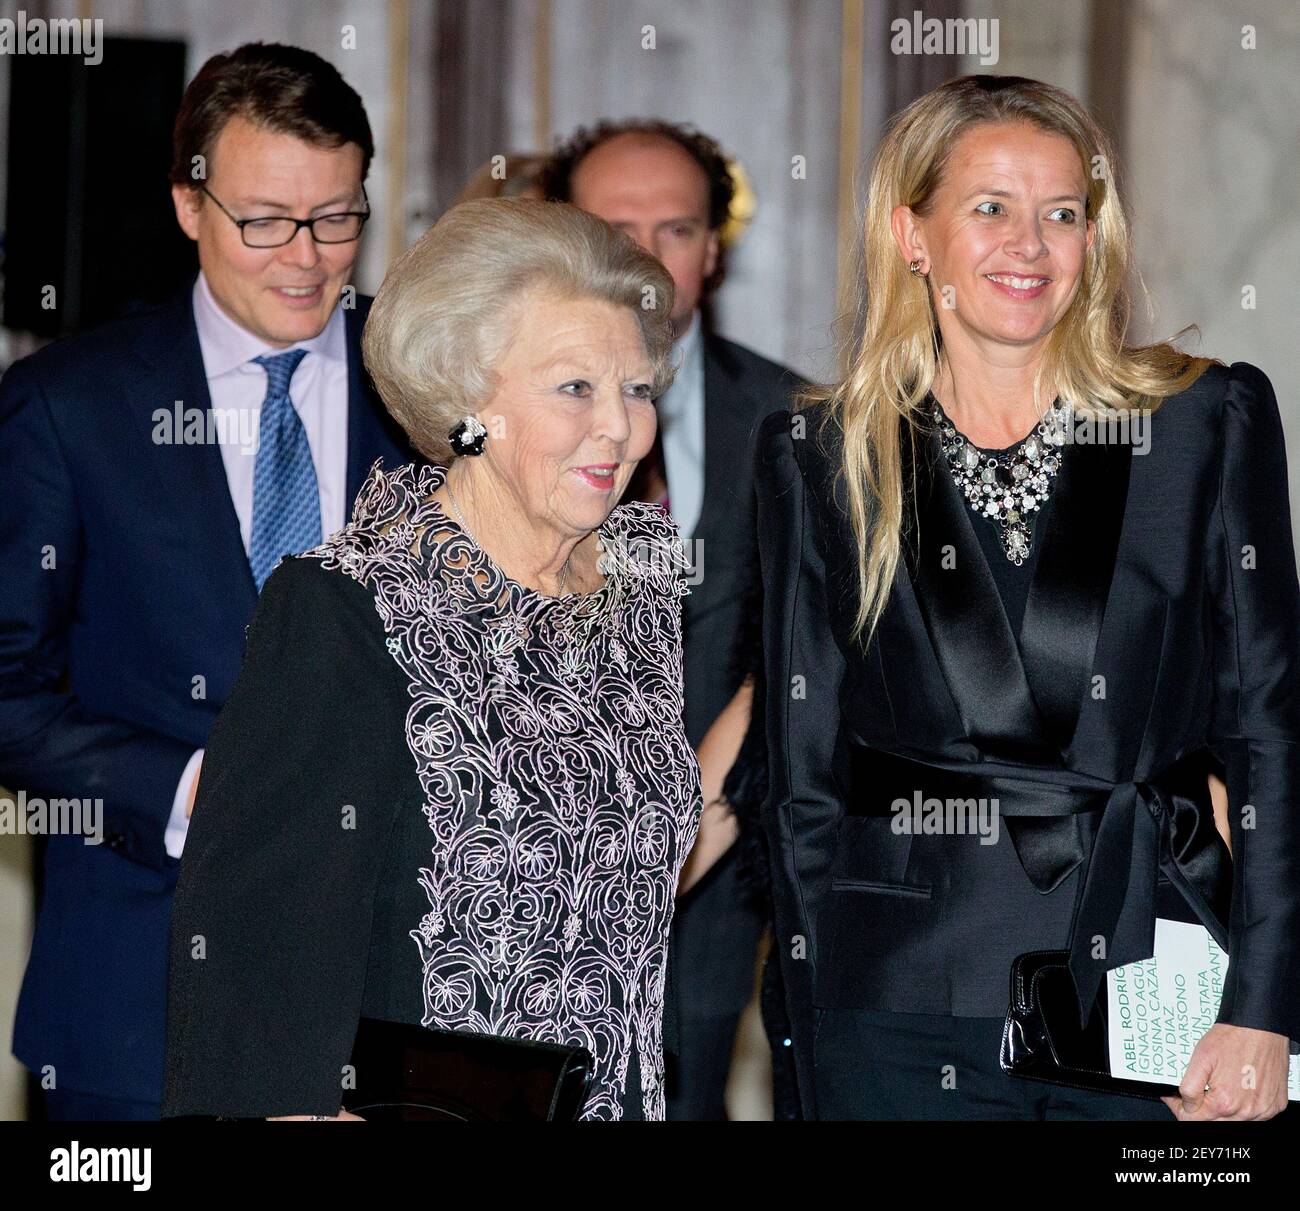 10-12-2014 AMSTERDAM - Princess Beatrix, Princess Mabel, Prince Constantijn attend the award ceremony of the Prince Claus Prize 2014 to Columbian artist and plant expert Abel RodrÃguez at the Royal Palace in Amsterdam (Photo by Robin Utrecht/Sipa USA) Stock Photo